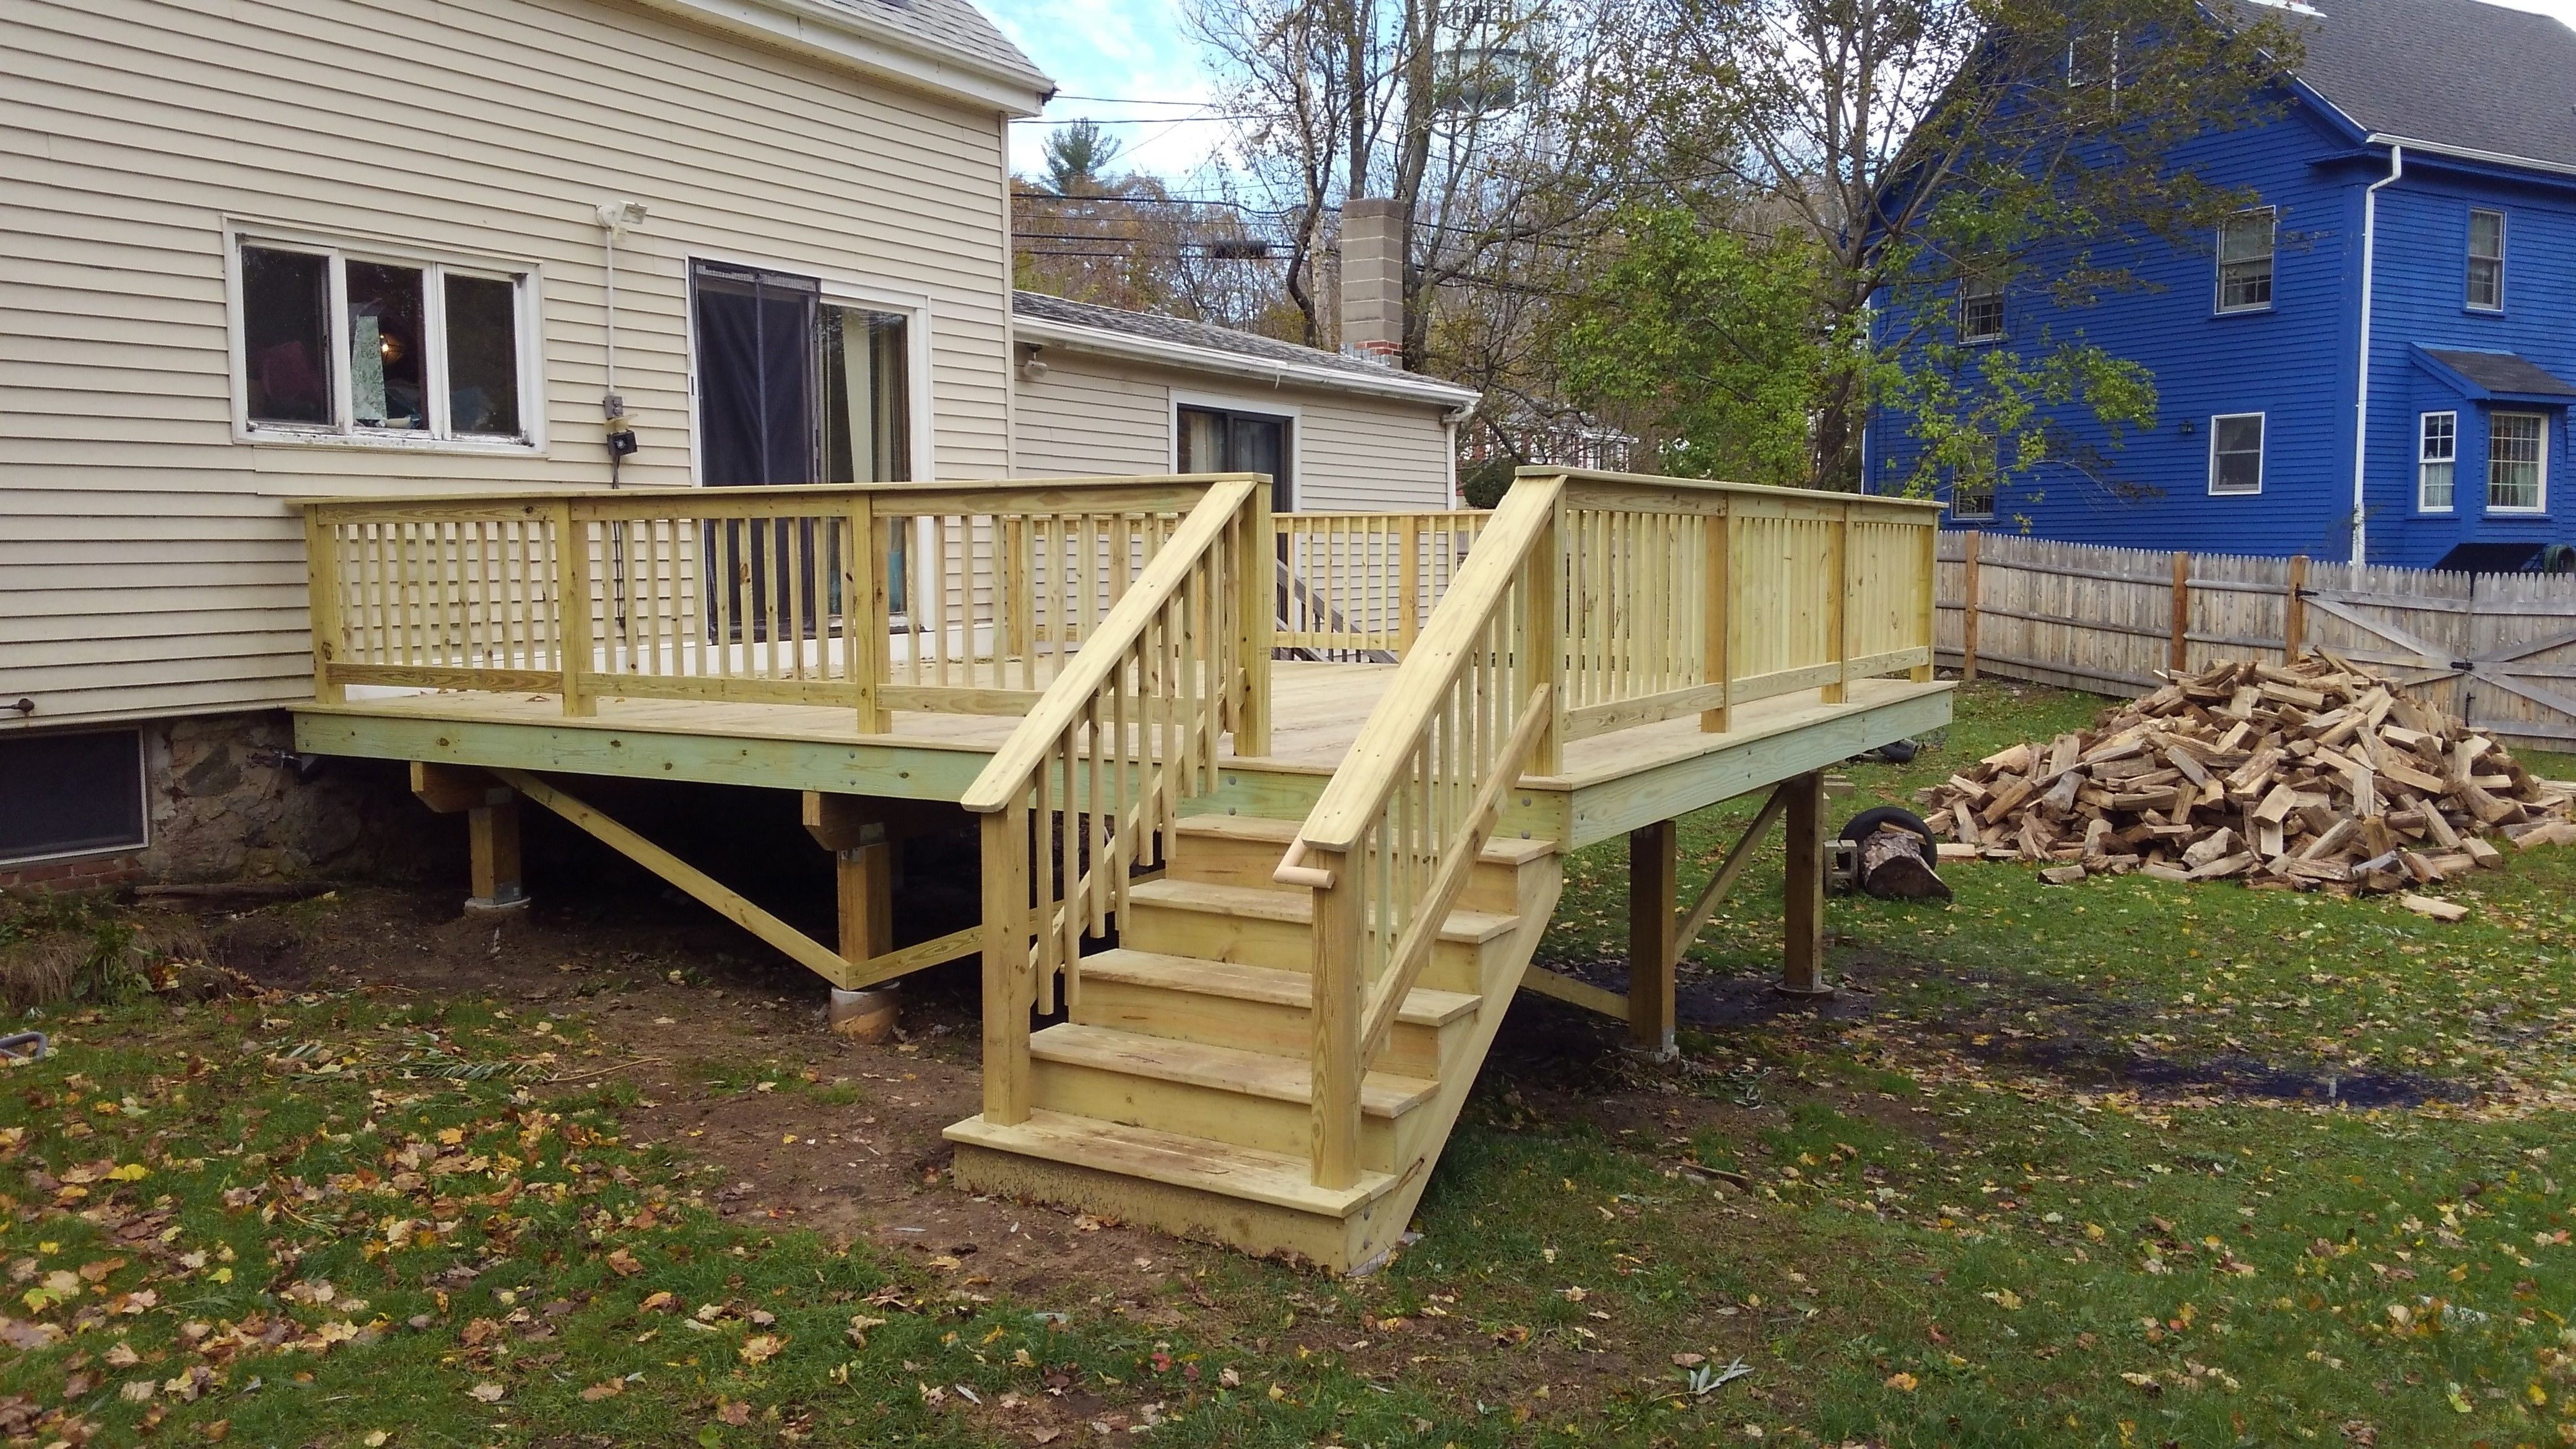 New Pressure Treated Deck - Picture 7693 | Decks.com by Trex